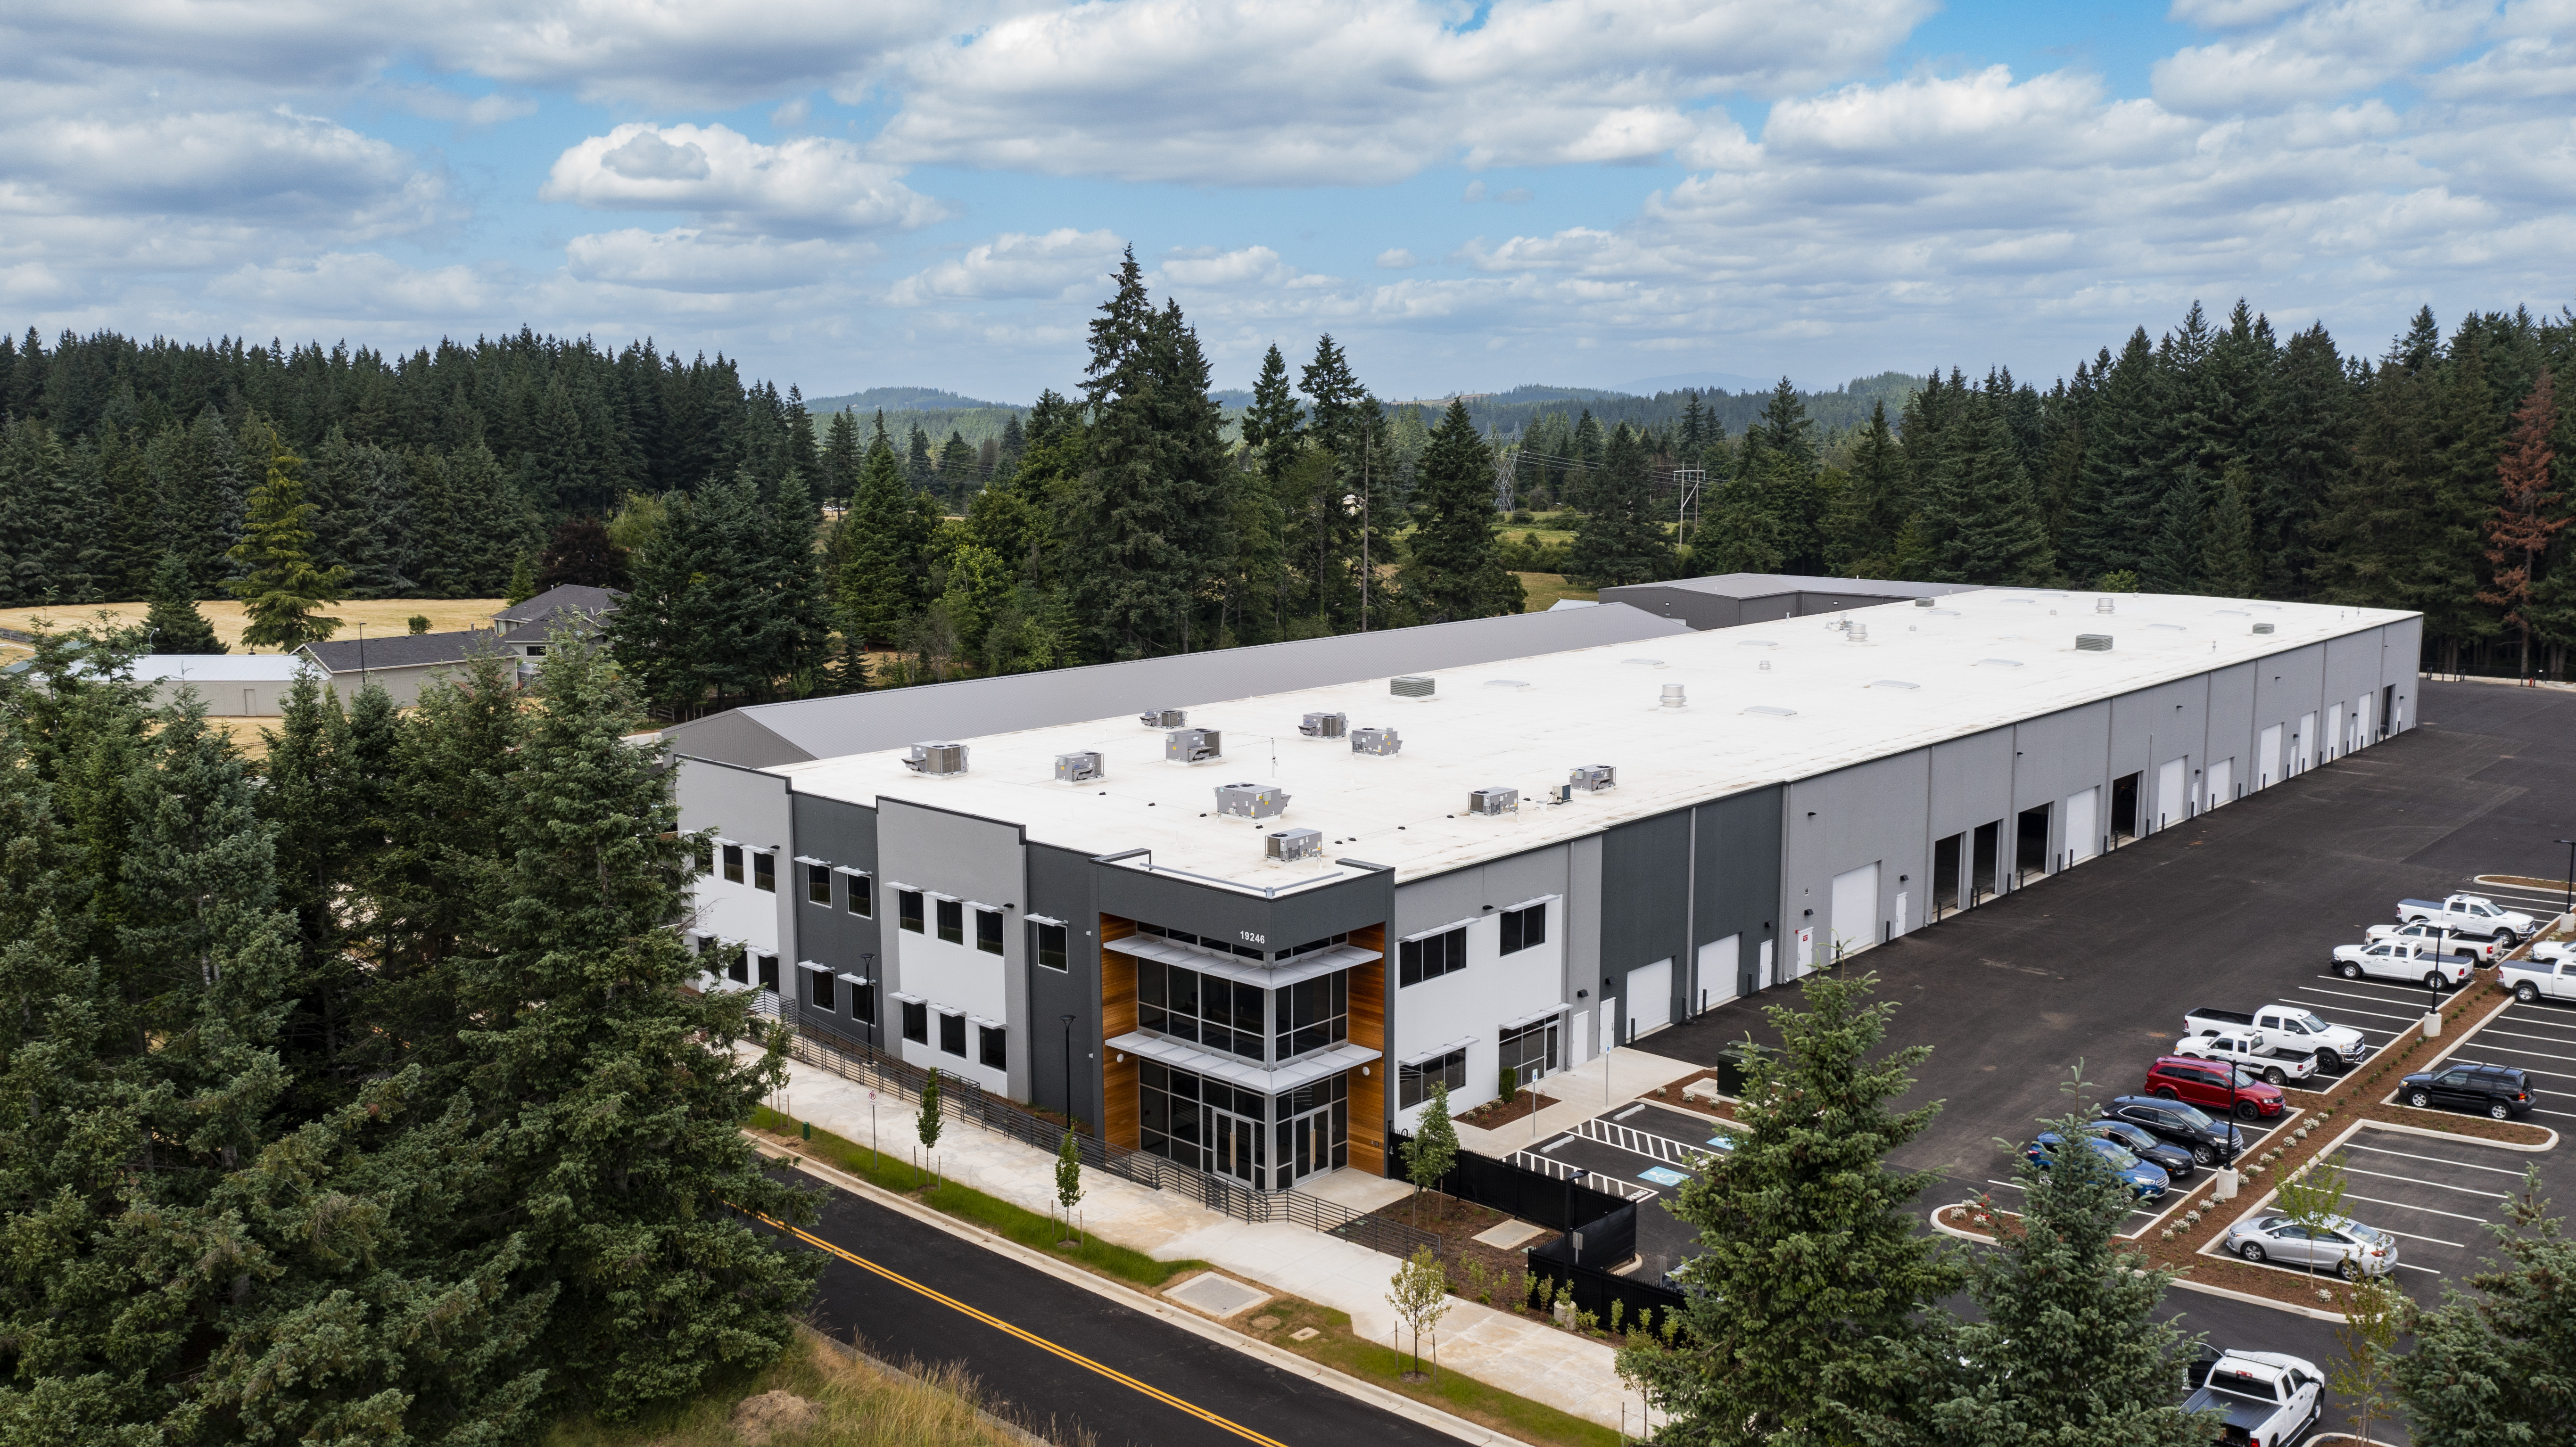 Aerial view of Transportation Services Building in Oregon City